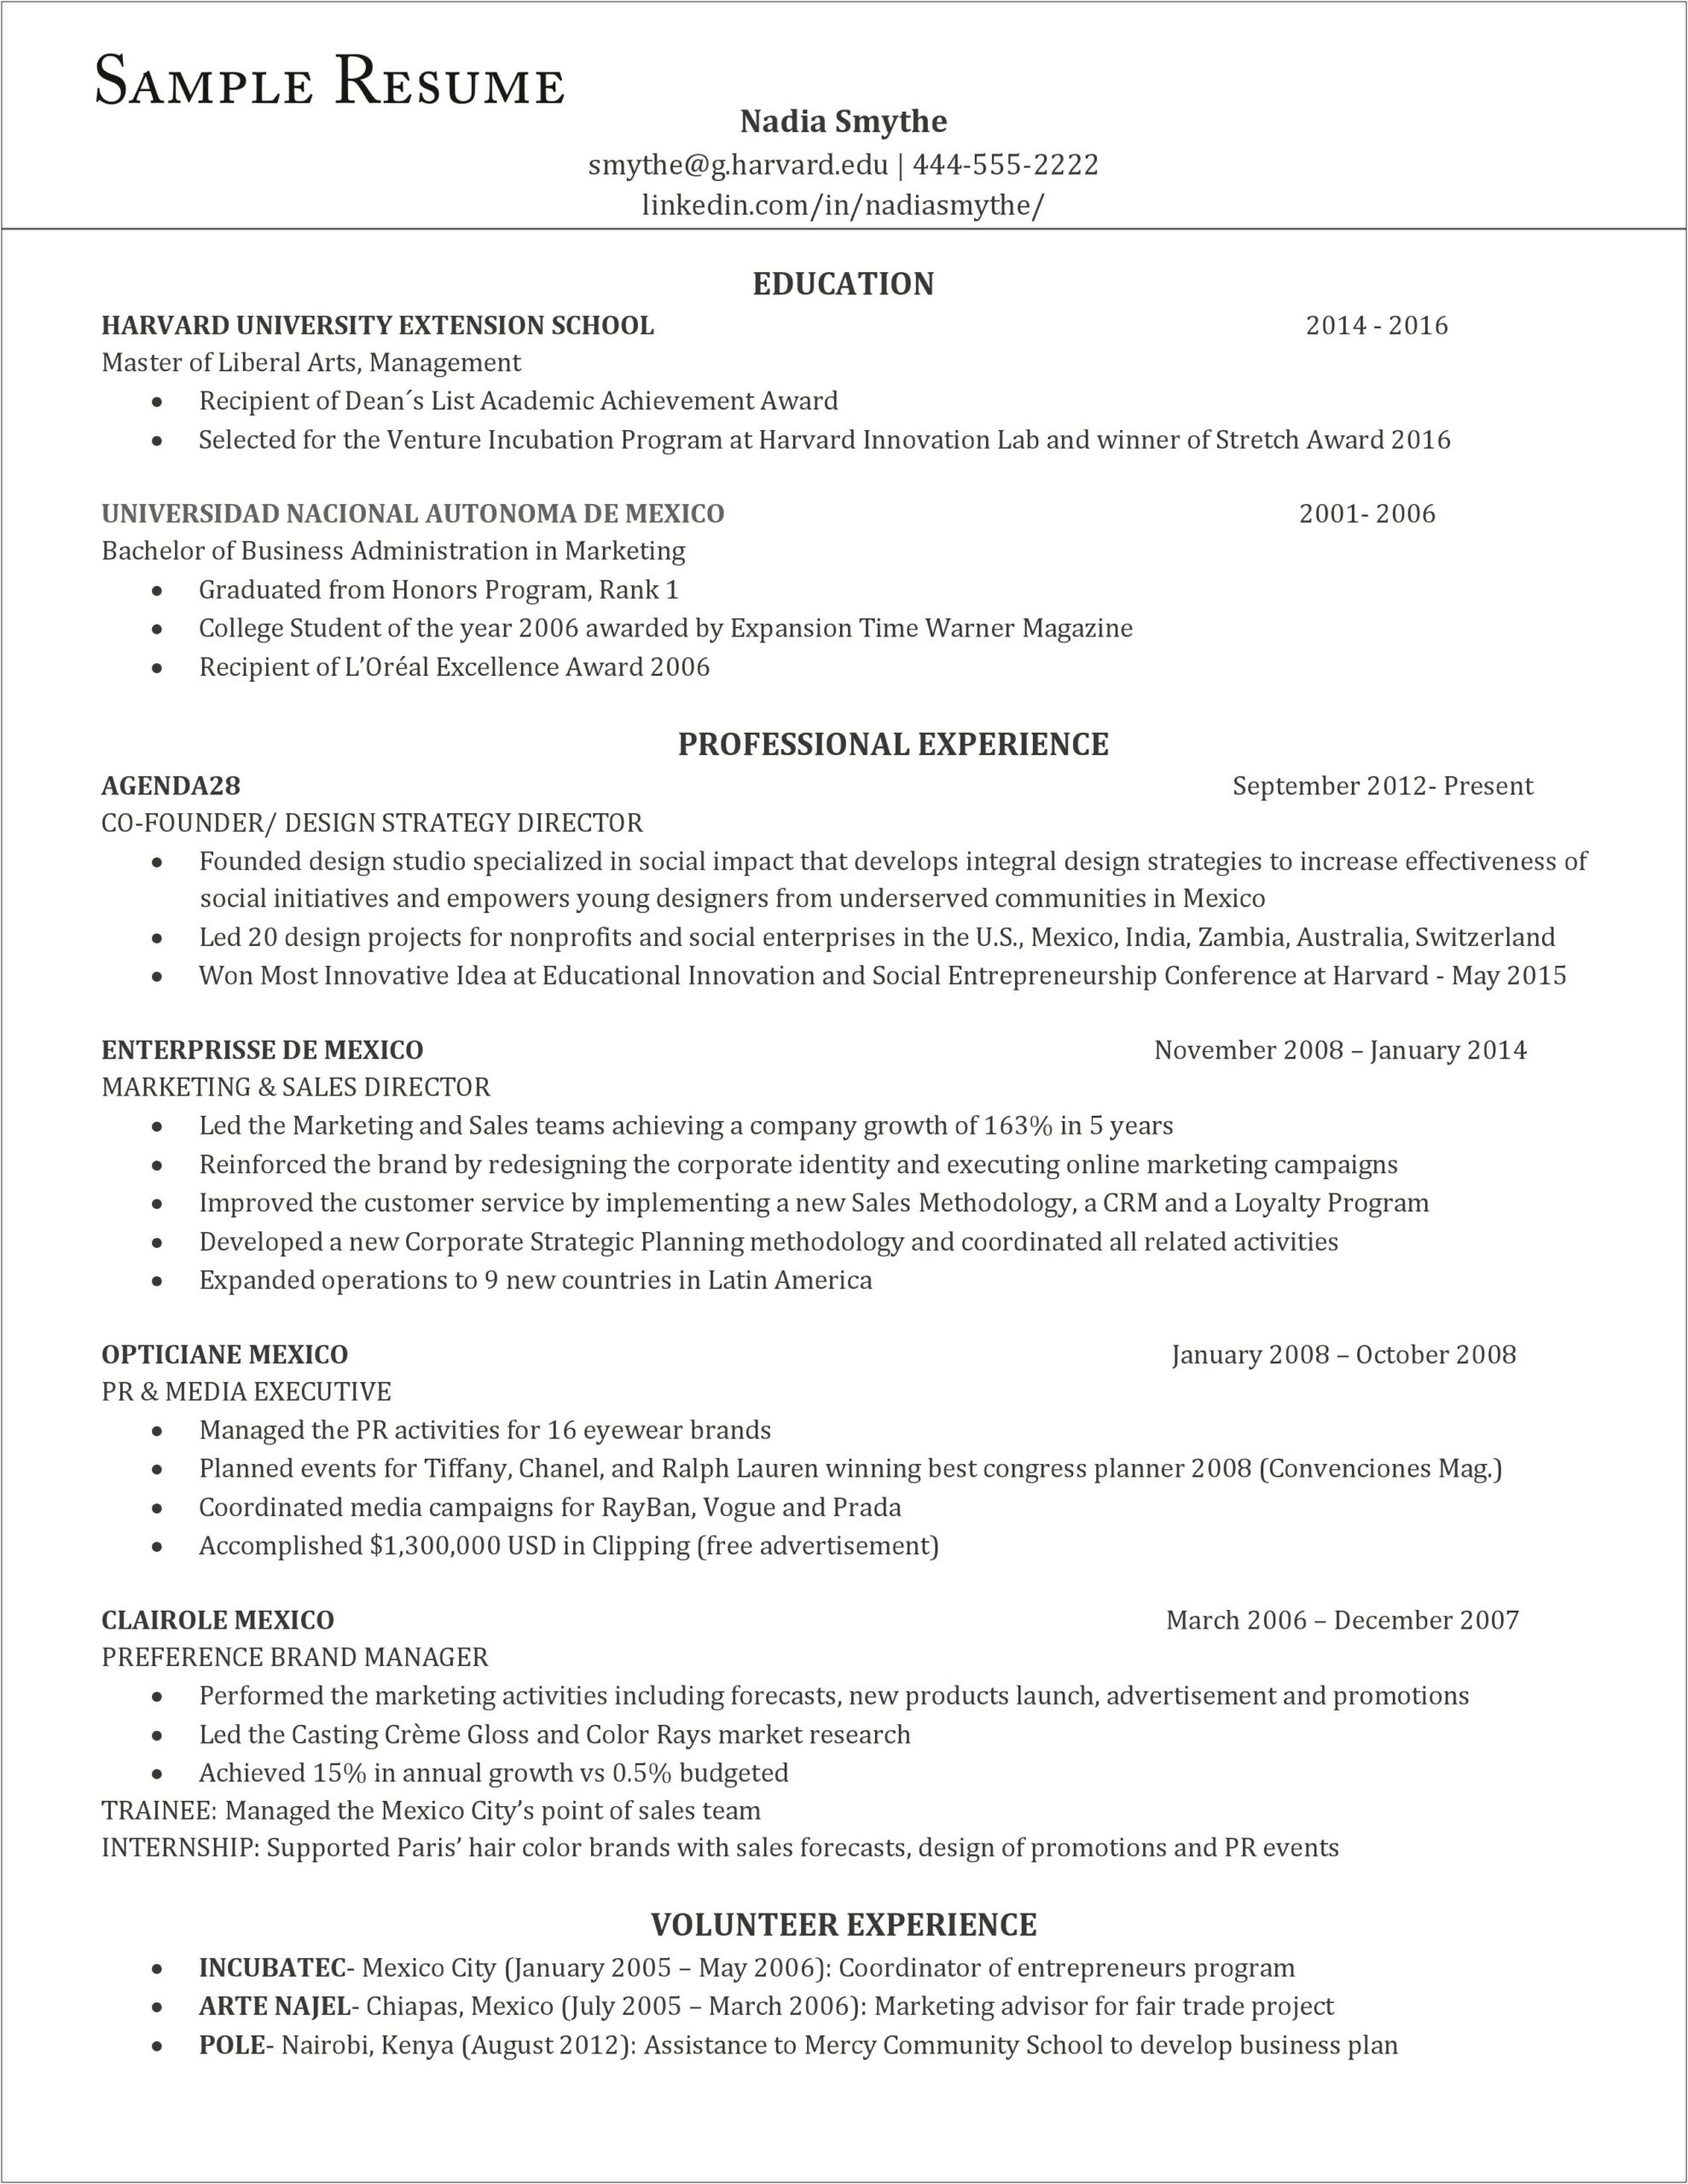 5 Year Goal Resume For Design Manager